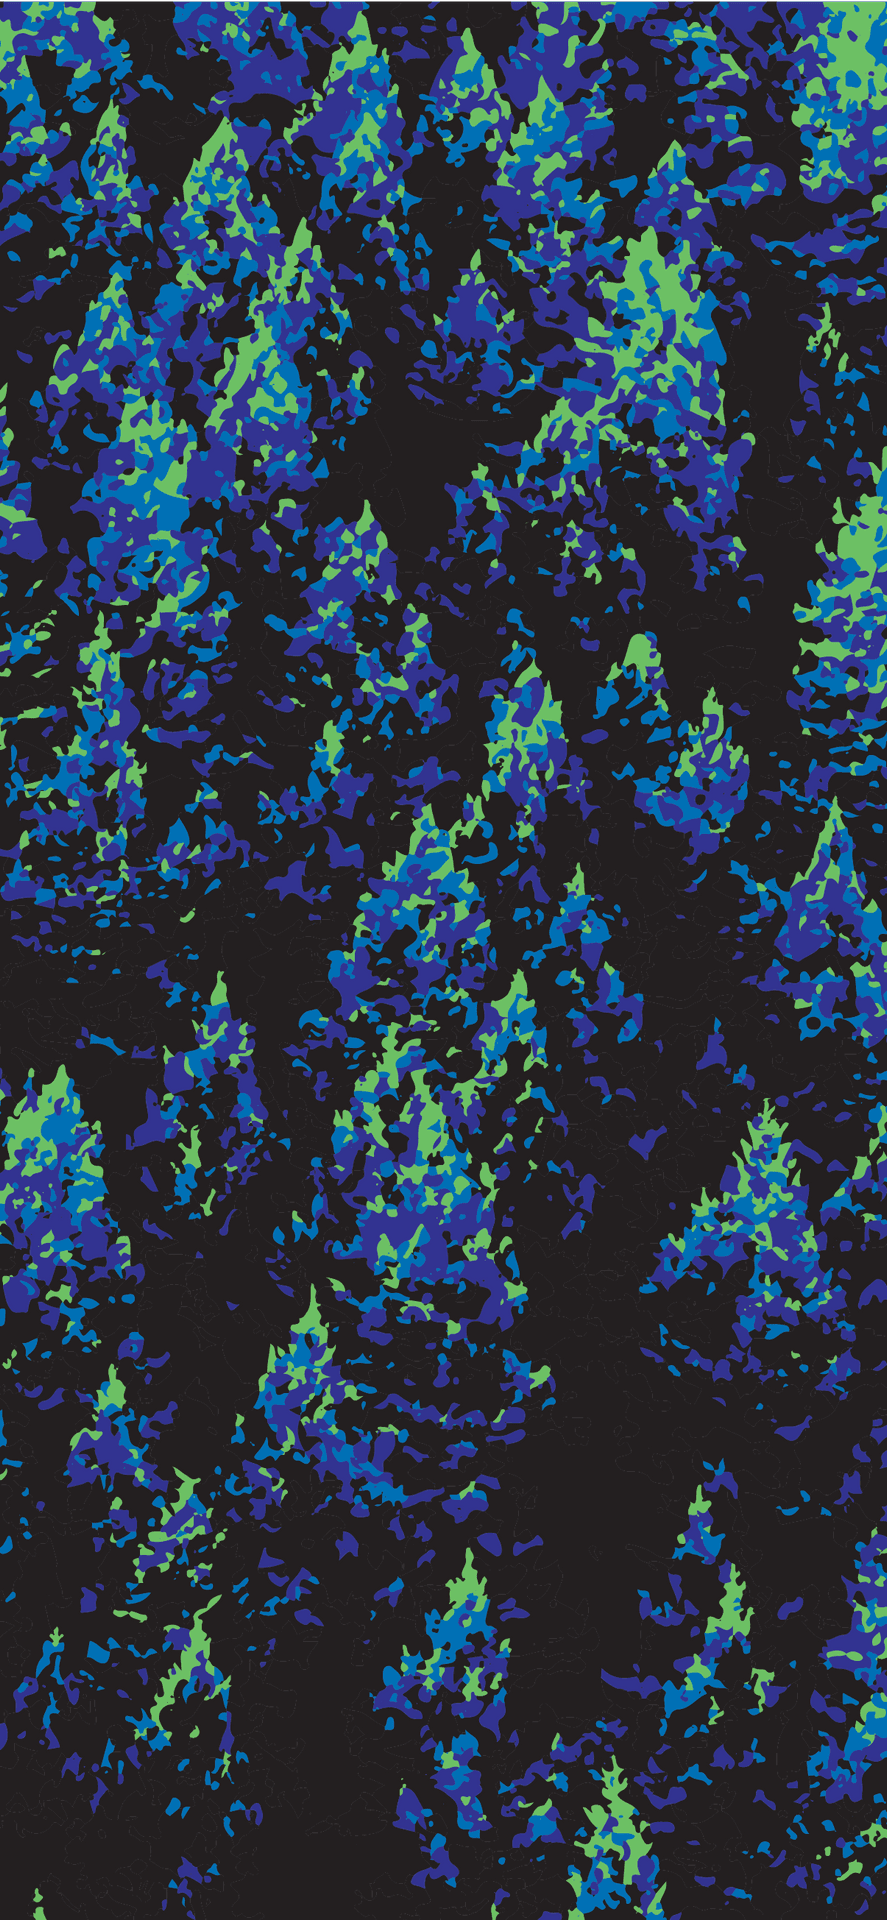 A Pixelated Image Of A Forest